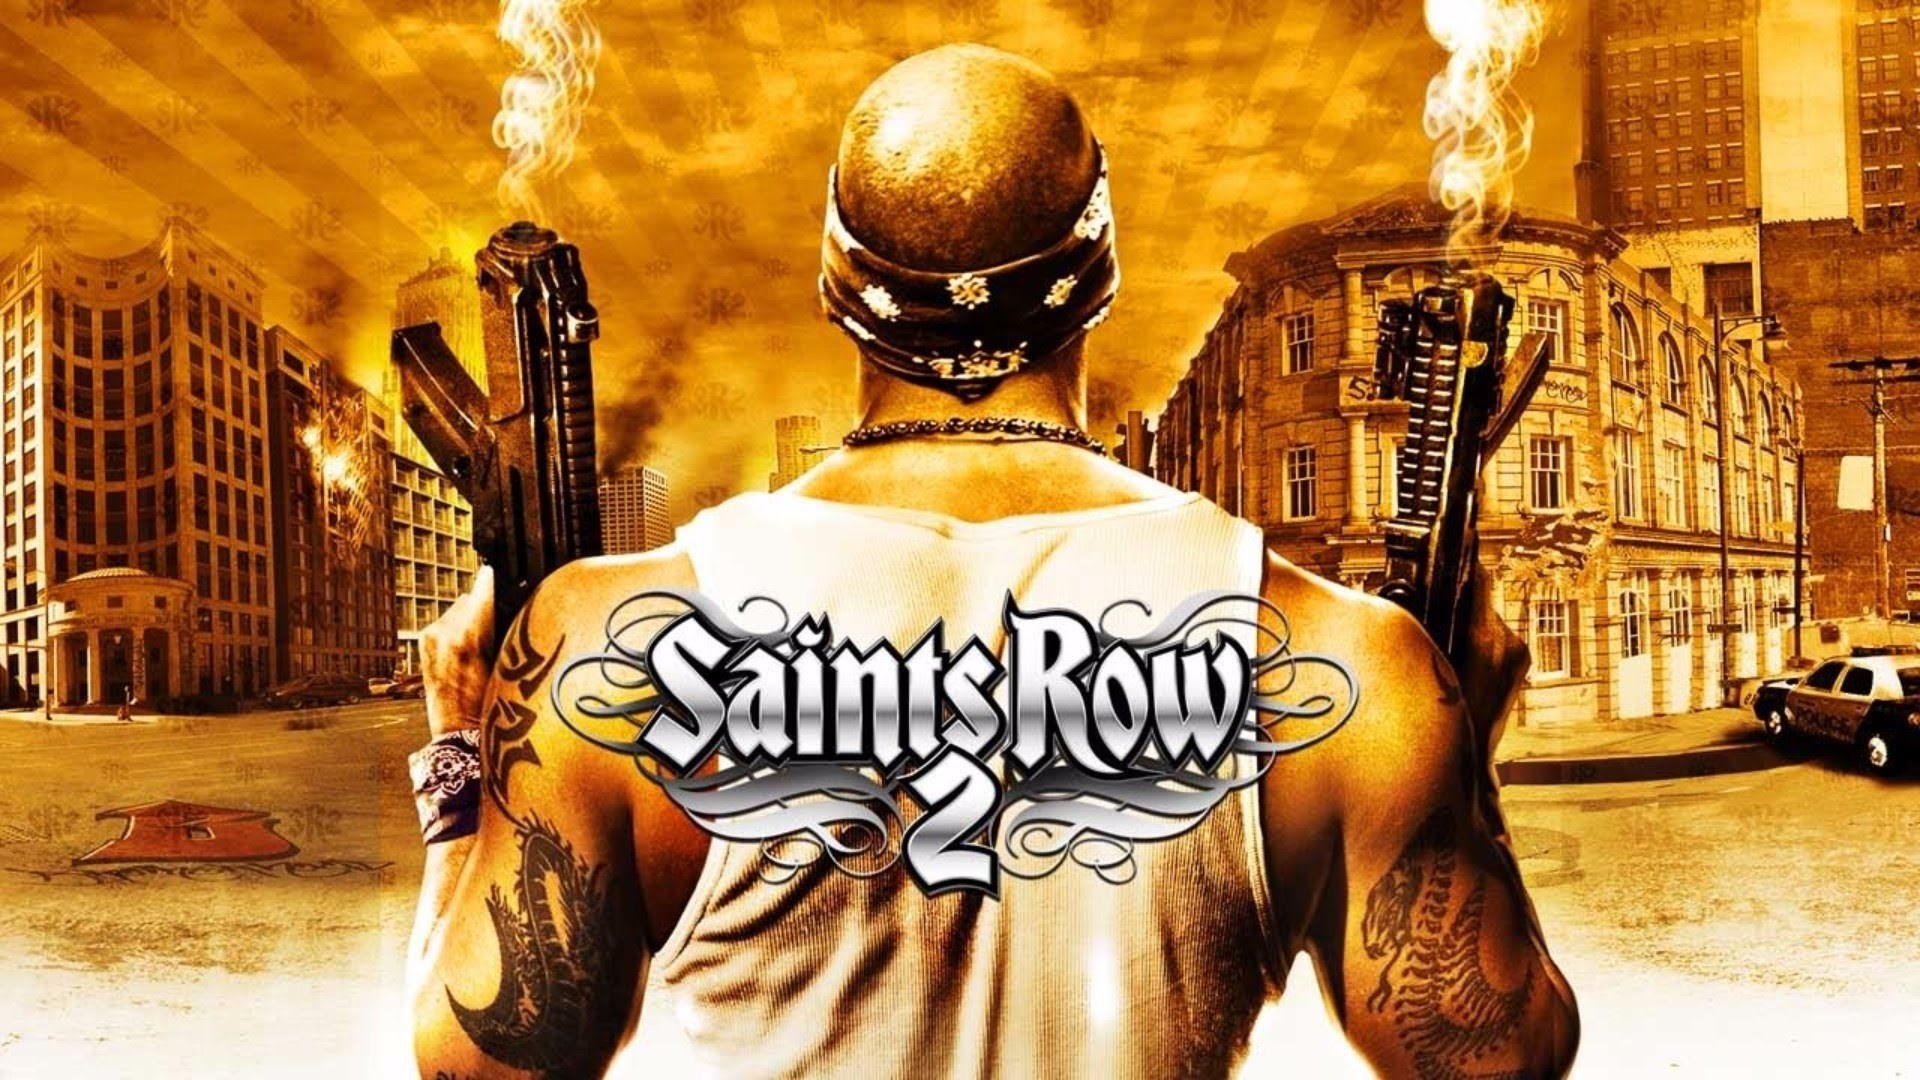 Saints Row 2 Review Res1lience's Projects